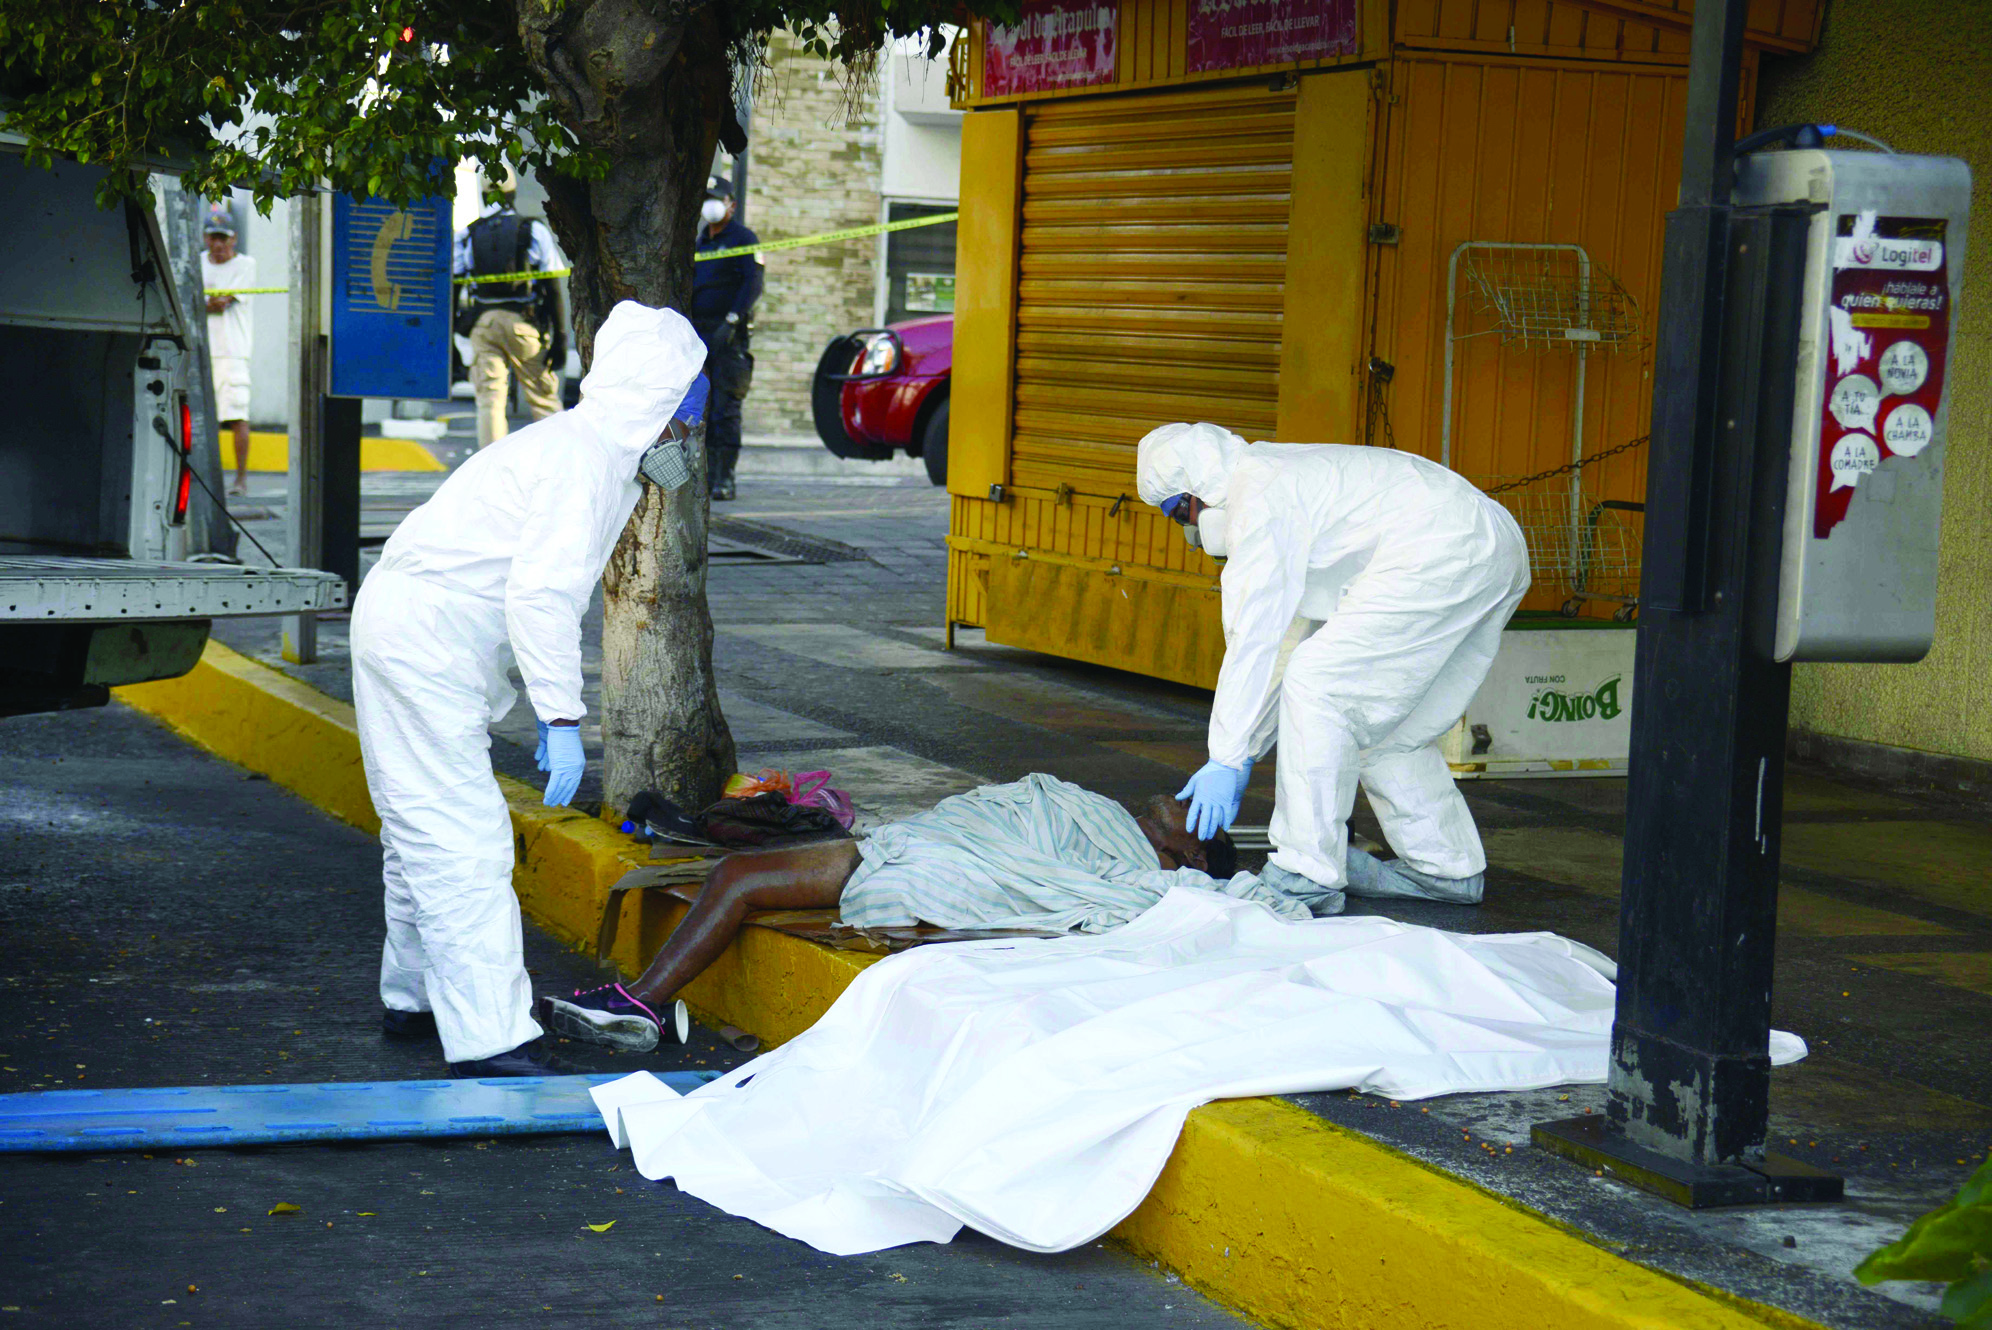 TOPSHOT - EDITORS NOTE: Graphic content / A corpse of a homeless man, suspected of having the COVID-19 coronavirus, is removed by forensic workers in Acapulco, Mexico, on April 23, 2020. (Photo by FRANCISCO ROBLES / AFP)